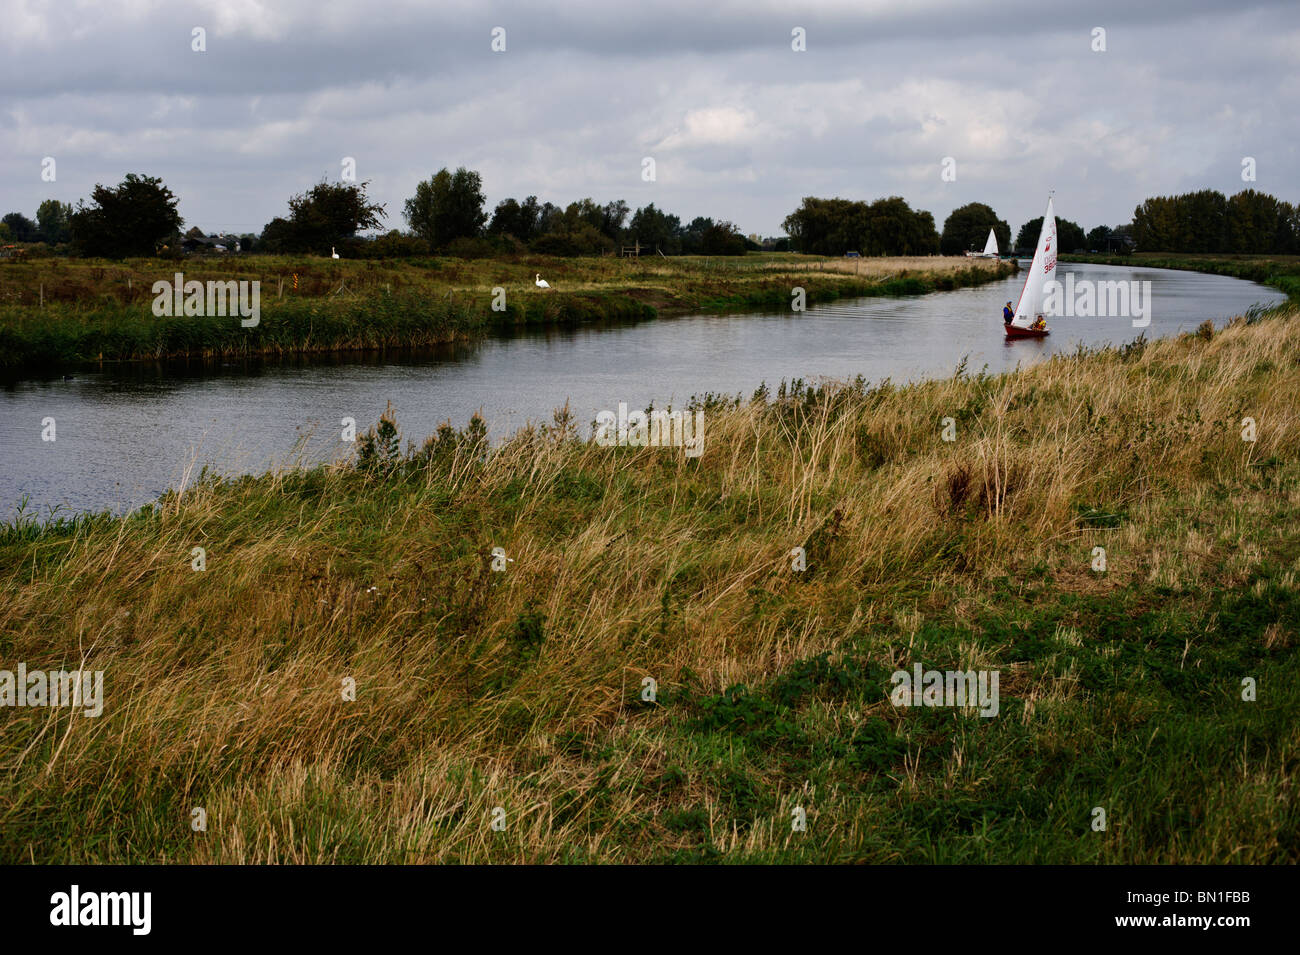 A small boat sailing on the River Cam near Waterbeach Stock Photo